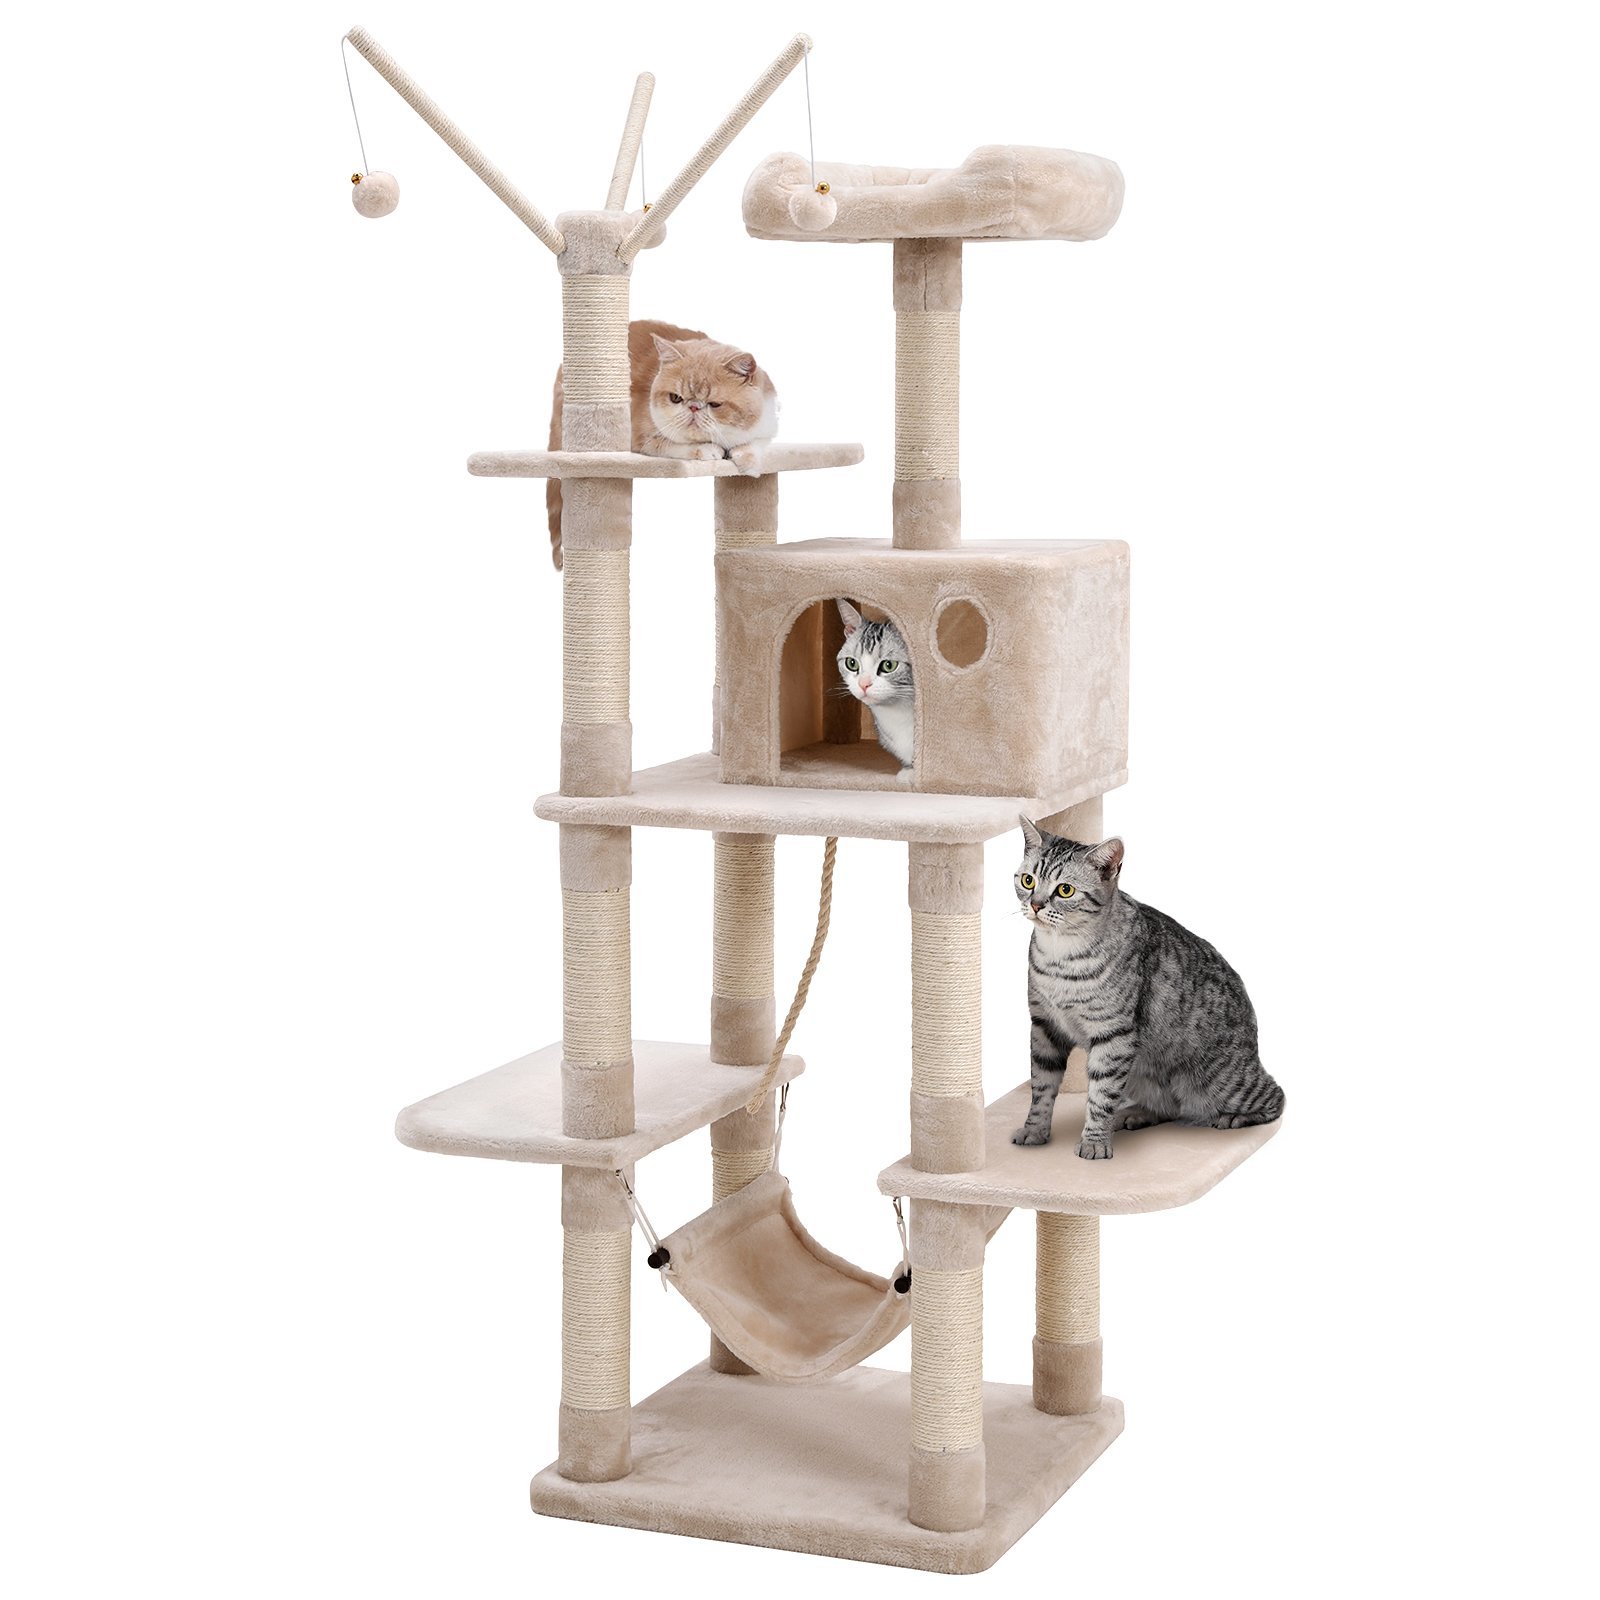 SONGMICS Cat Tree Cat Scratcher Activity Centres Scratching Post with a hammock Beige PCT86M